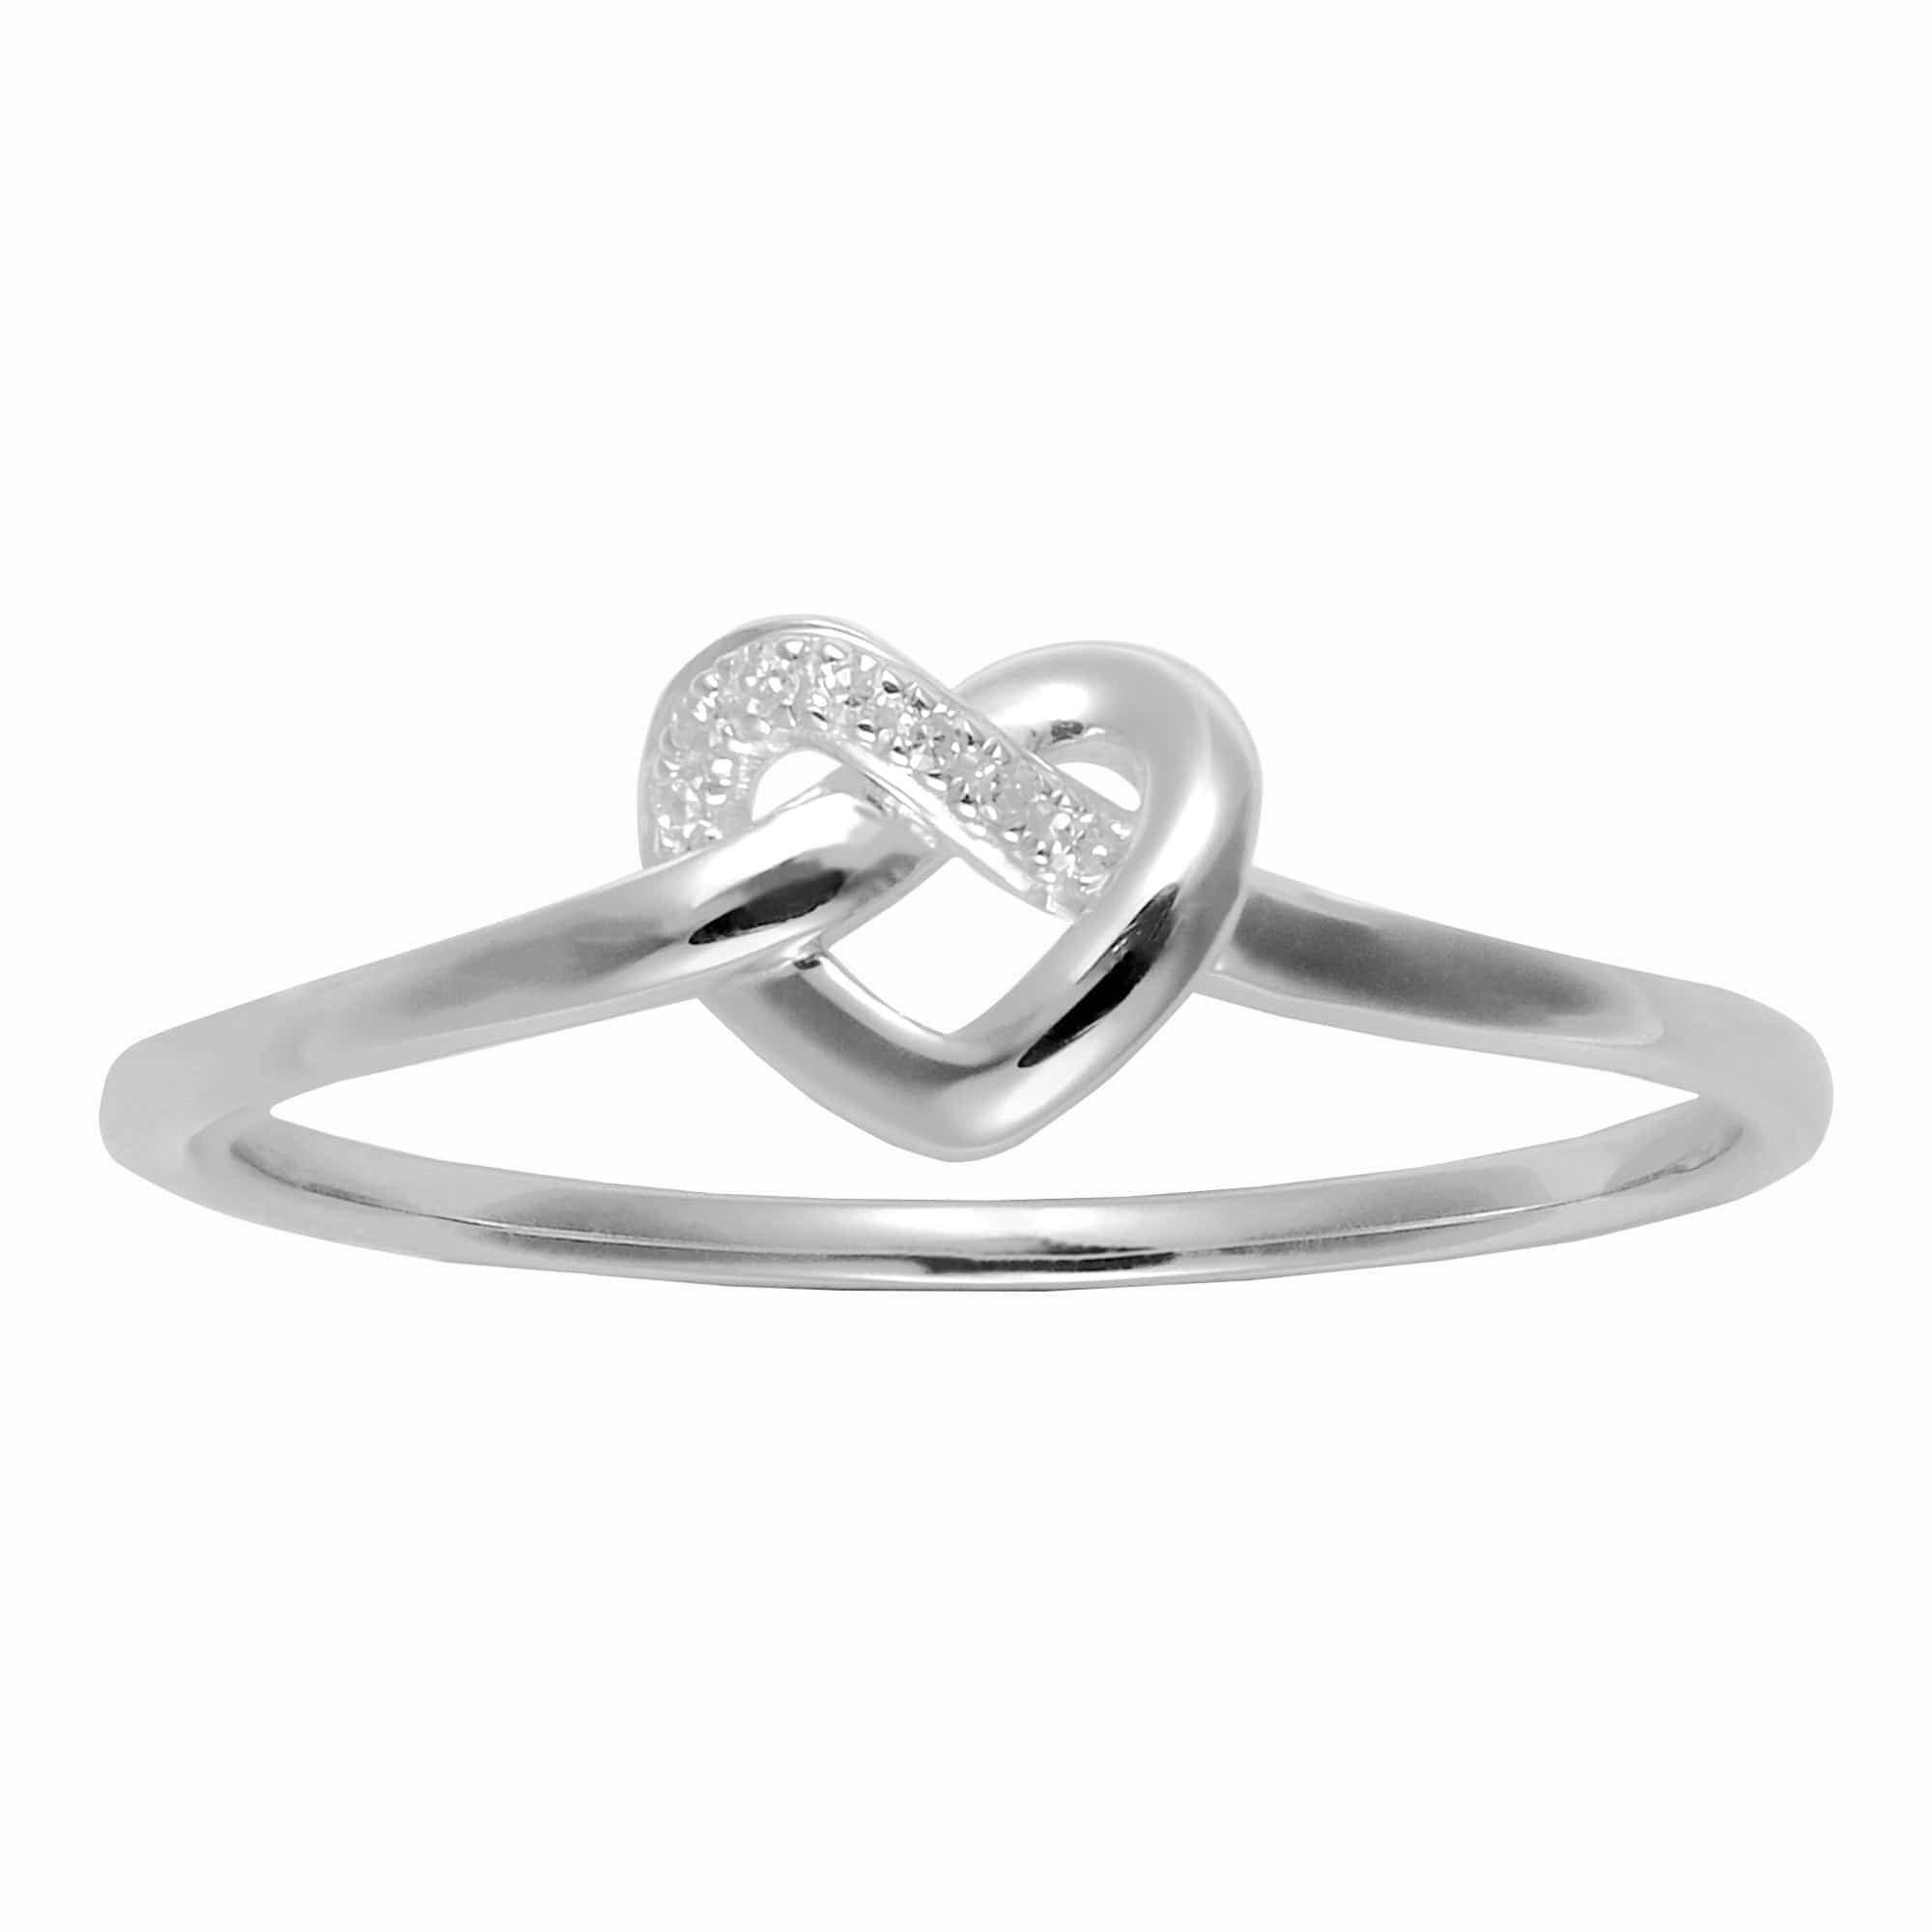 60292R011 Classic Round Diamond Heart Knot Ring in 9ct White Gold 2